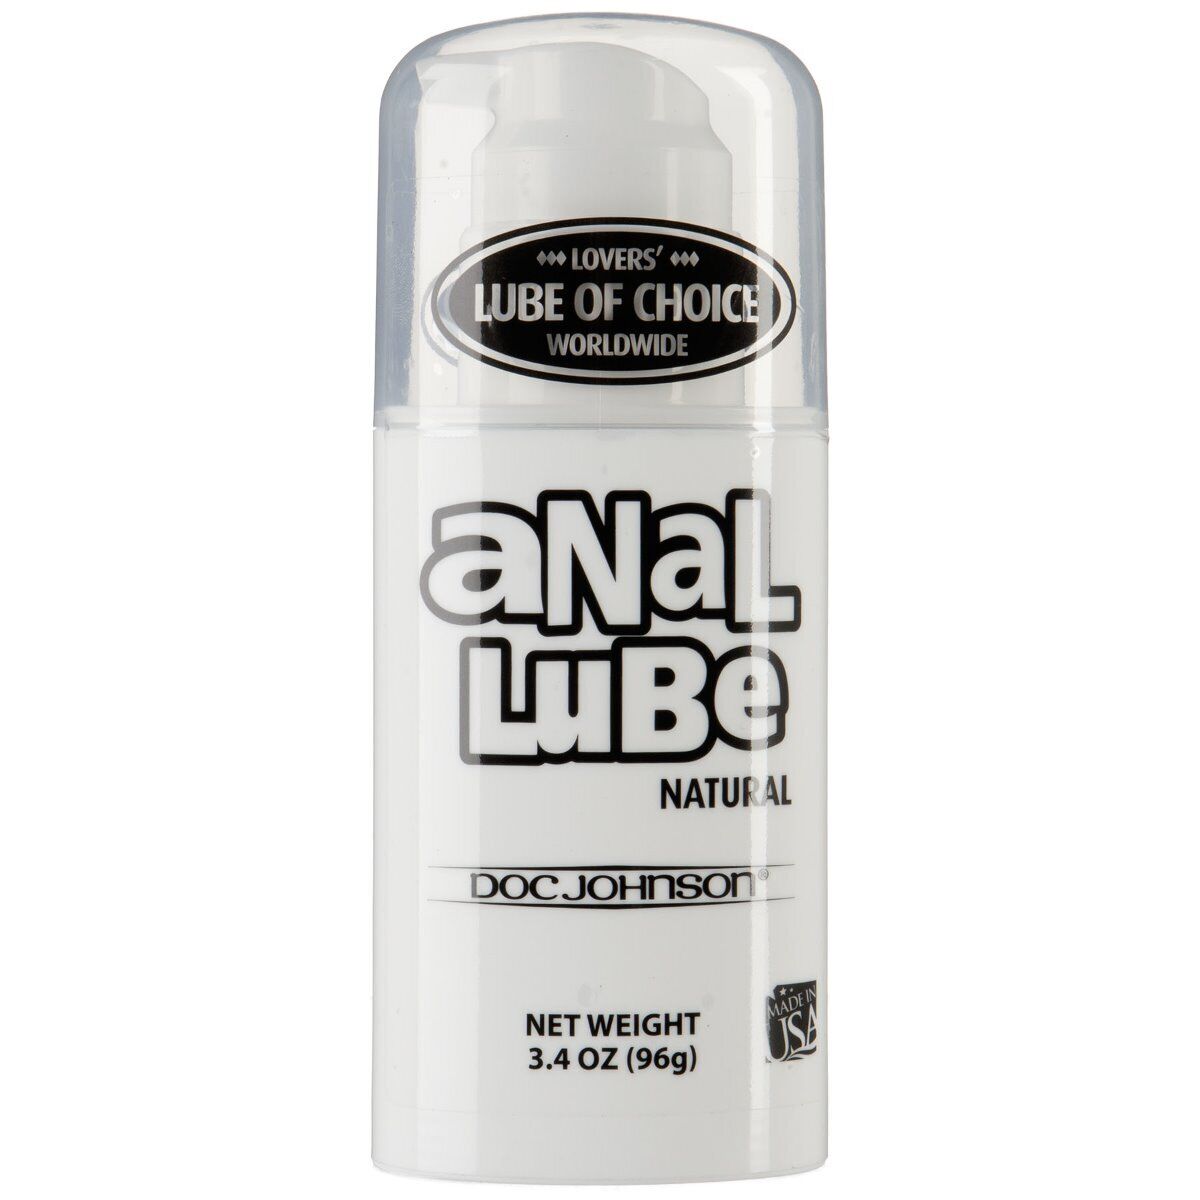 Doc Johnson Petroleum Based Thick Anal Lube Natural Personal Lubricant